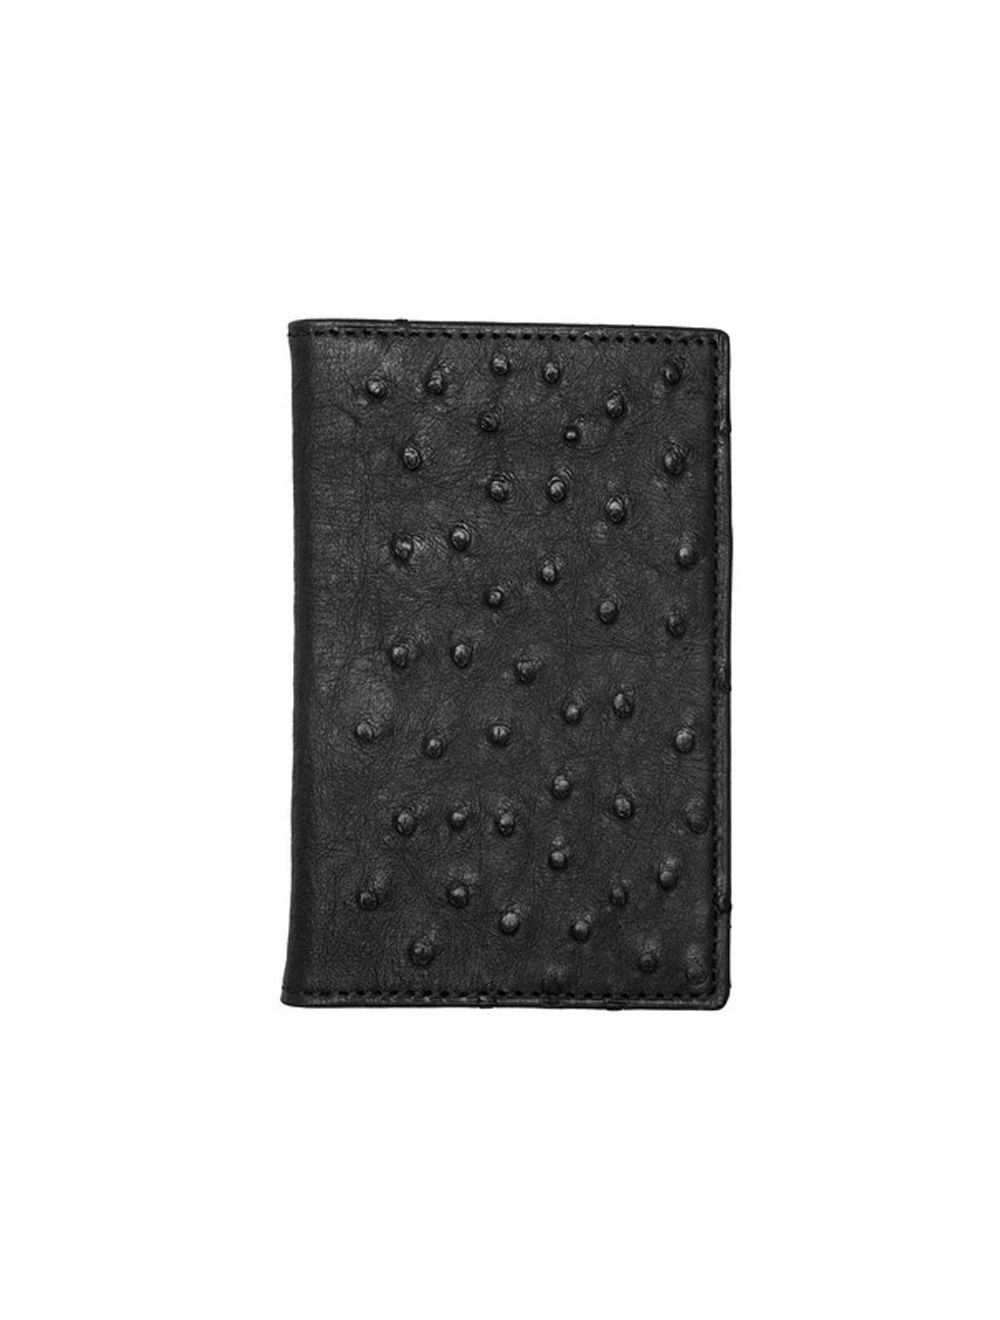 Exotic leather bi-fold wallet, how to care for it? : r/Louisvuitton